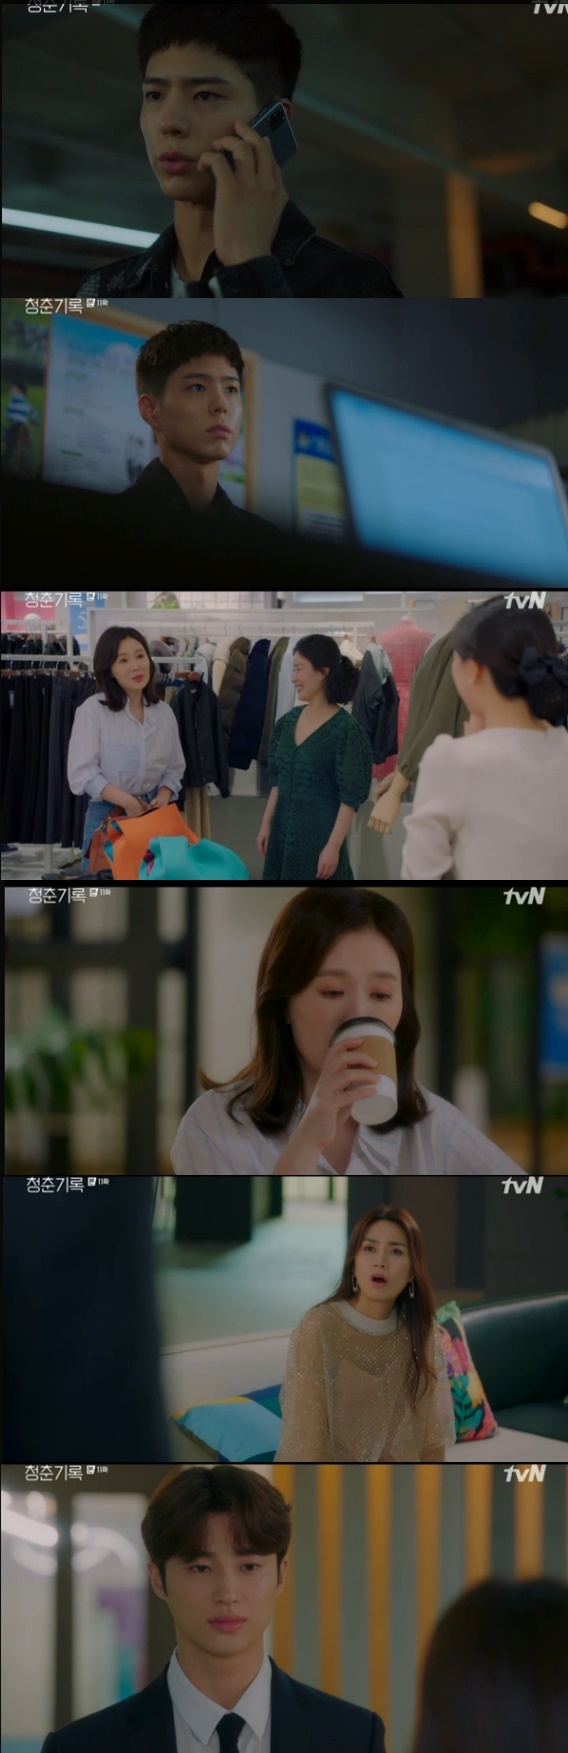 Park Bo-gum shocked by Lee Seung-juns DeathIn the 11th episode of TVNs Monday drama Record of Youth (directed by Ahn Gil-ho, the playplay by Ha Myung-hee), which aired on October 12, Sa Hye-joon (Park Bo-gum) was portrayed as devastated by Charlie Jungs death.Sa Hye-joon, who won the Grand Prize in the acting prize, was investigated as a reference person as Charlie Jung died in extreme choice.Sa Hye-joon visited the police station and said, I have met more than a year.I have a lot of doubts about Charlie Jung and you on the Internet, said Lee Min-jae, Why did you go alone? Hye-joon said, Its not true. I wanted to solve it quickly.They cant have a funeral until the case is closed, he said.Han Ae-sook (Ha Hee-ra) came to see Qiao Zhenyus mothers clothes and did not spend money on shopping, and Ae-sook recalled the memory of Hye-joon asking how much she owed home a while ago.When Qiao Zhenyus mother urged her to move to the next house next door to Haehyo, Aesuk said, Why do you want to be interested in the money Hyejun earned?